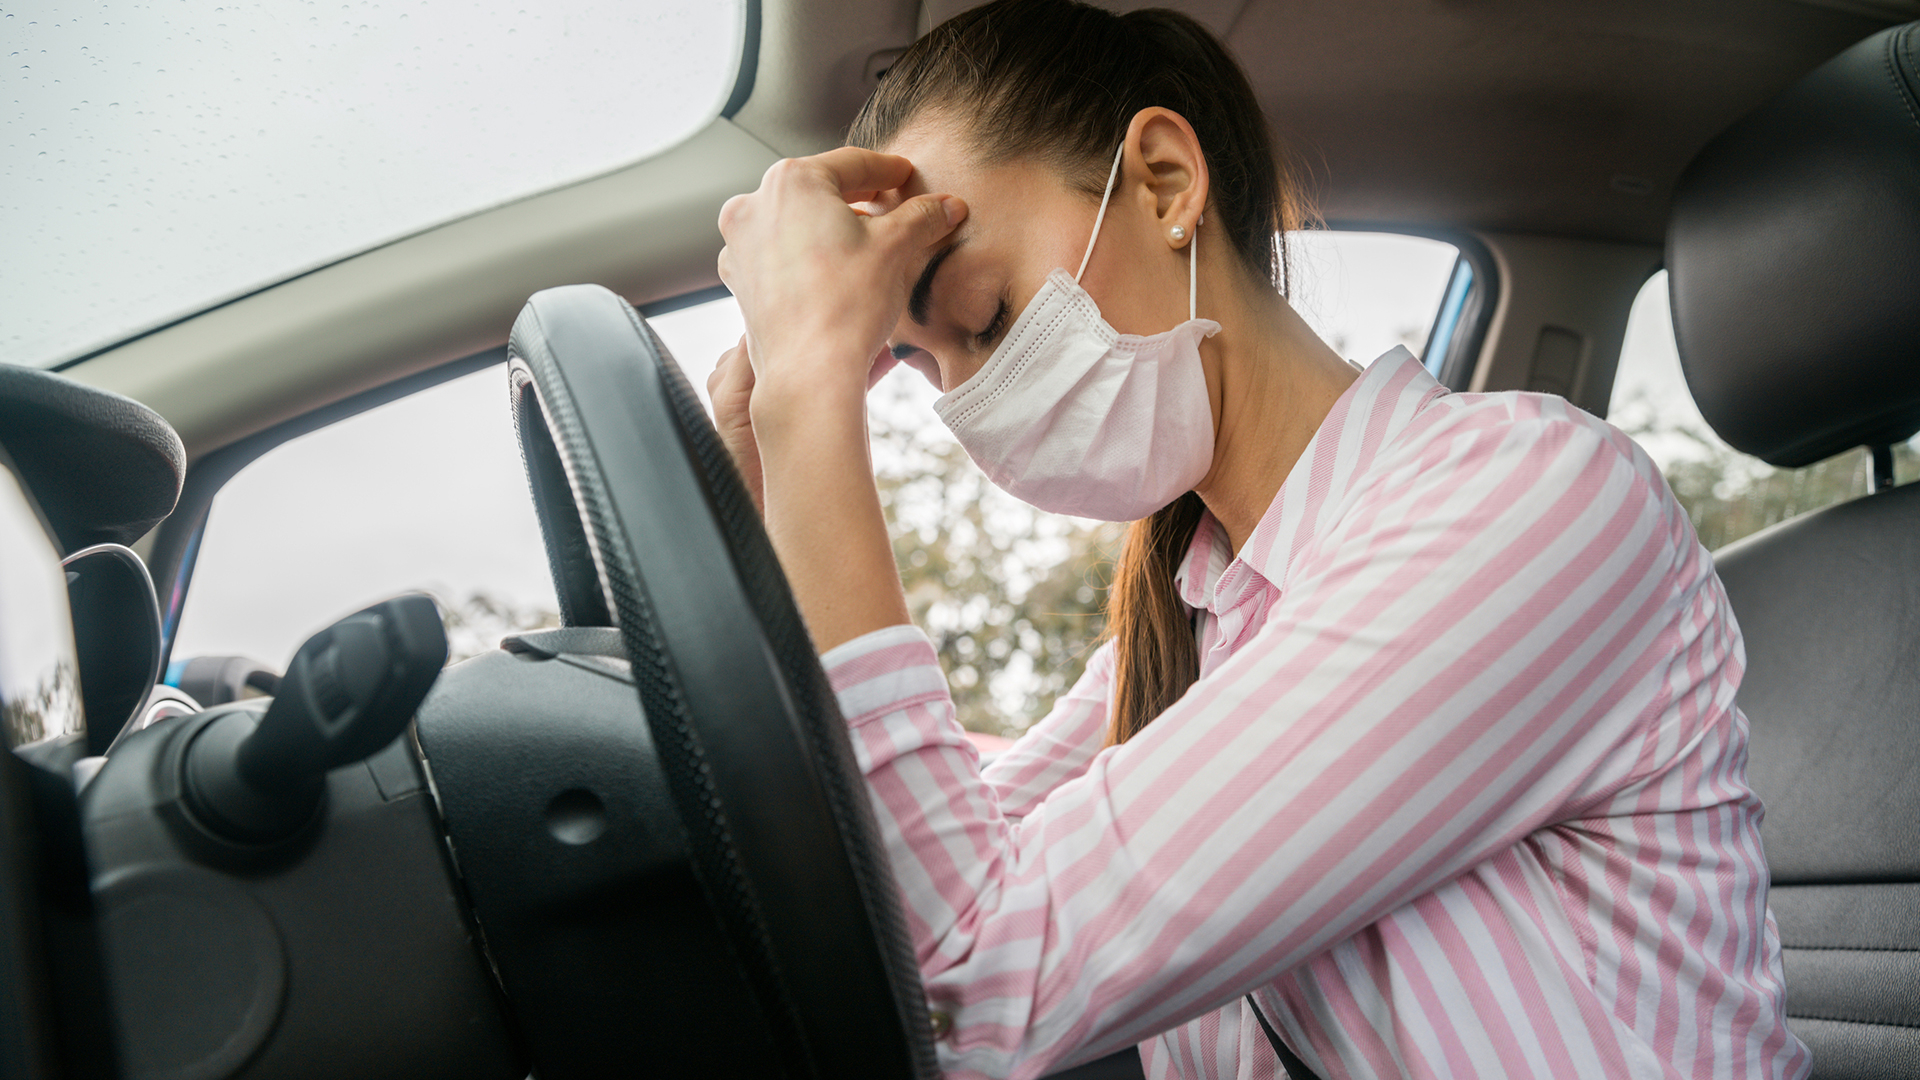 Holiday travel season is just around the corner, which means millions of people will experience motion sickness in a car, train, or plane. How can we manage this common discomfort to make the journey just as fun as the destination? Dr. Jason Fishel, MD, answers our biggest questions about motion sickness management.